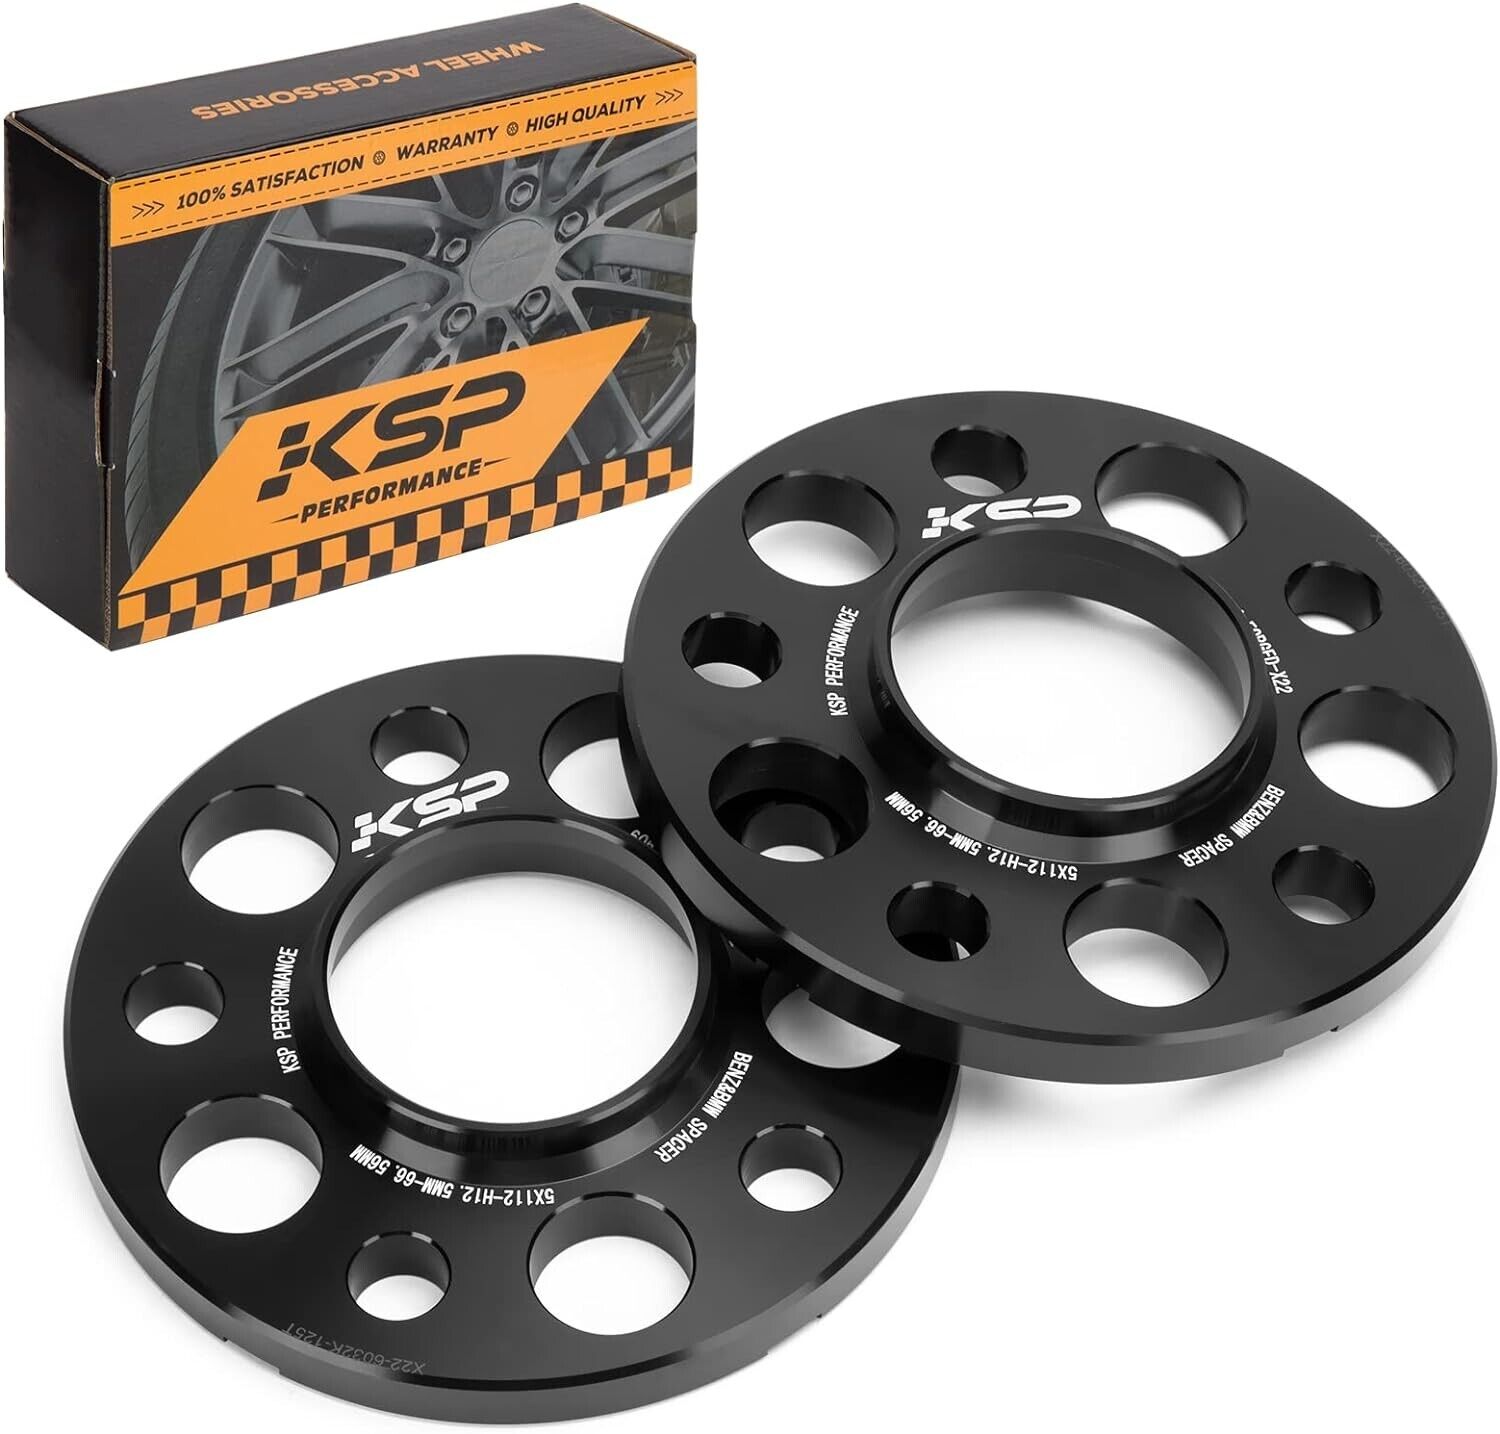 KSP 2PC 15mm 5X112mm Wheel Spacers 66.56mm Hubcentric for Mercedes-Benz W203